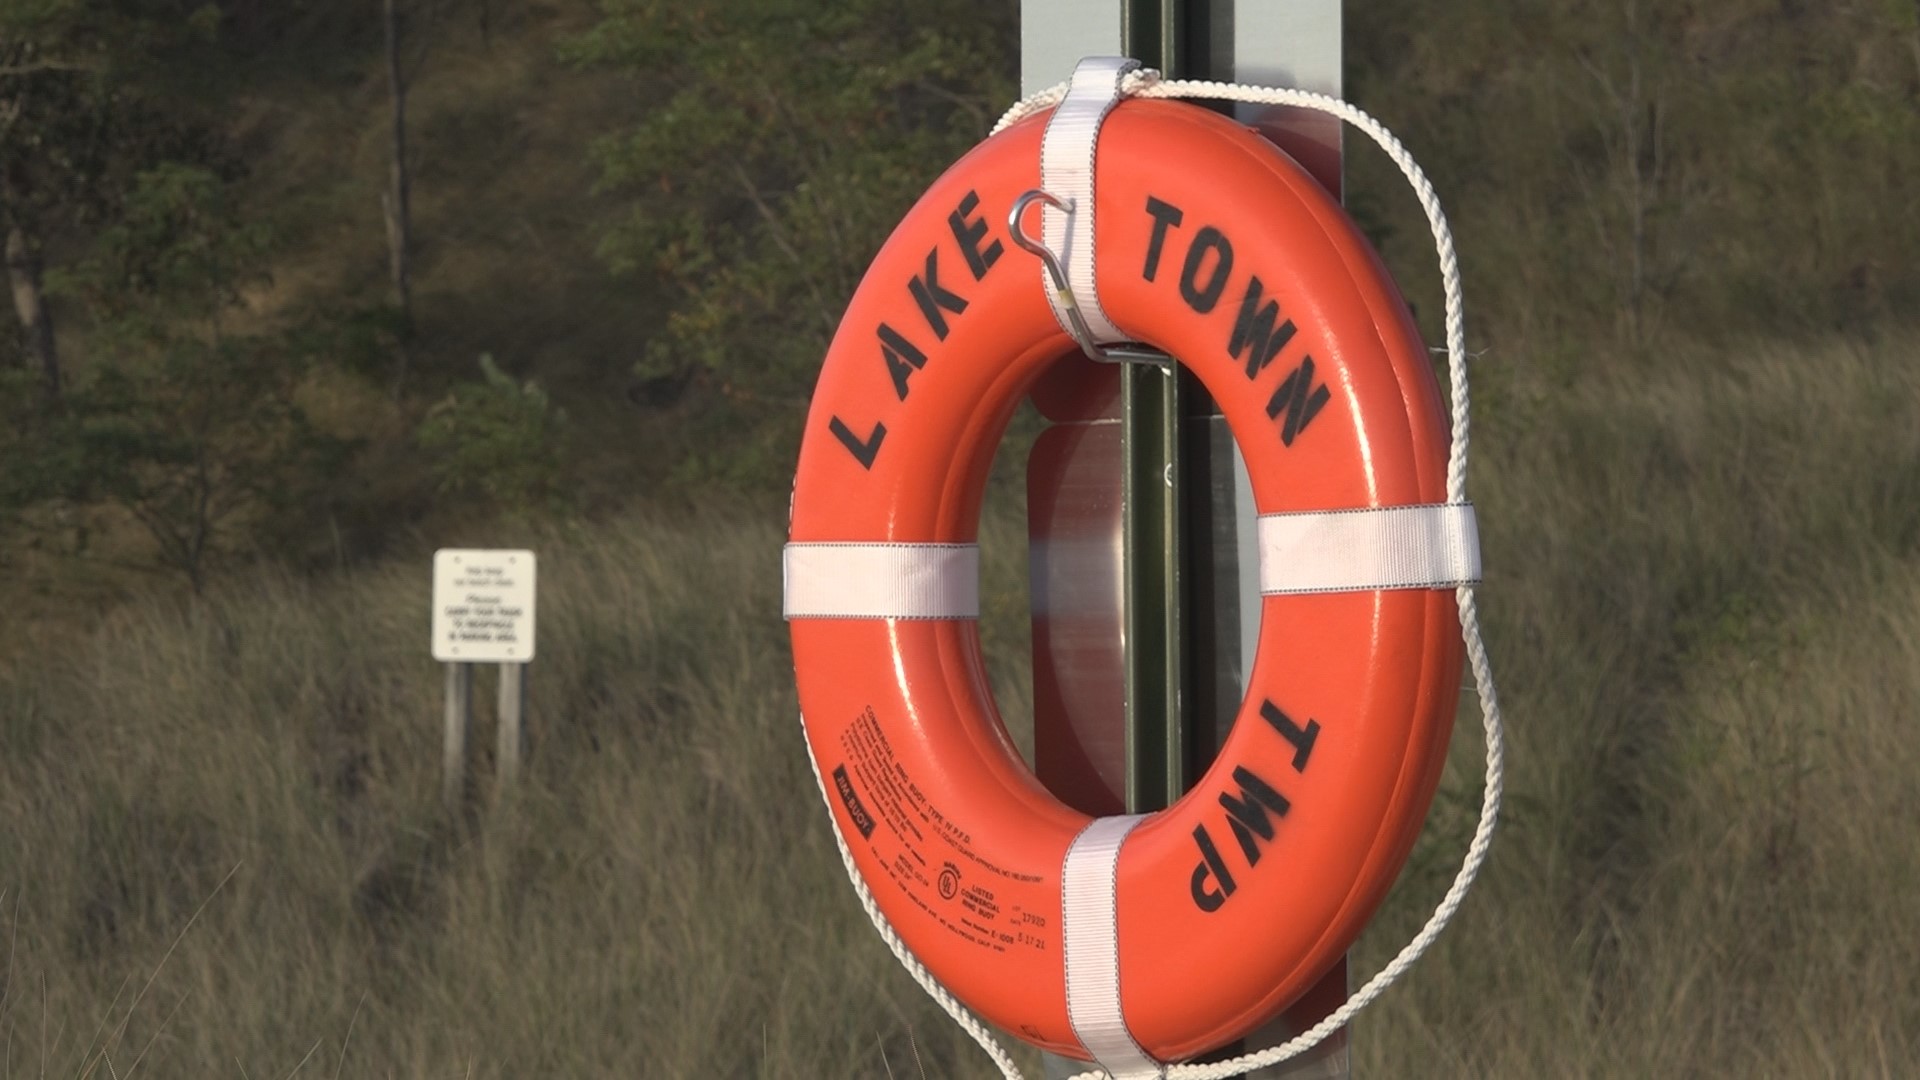 Labor Day is typically the last big beach weekend of the summer. One lakeshore township is prepared to save lives from potential dangers in the water.